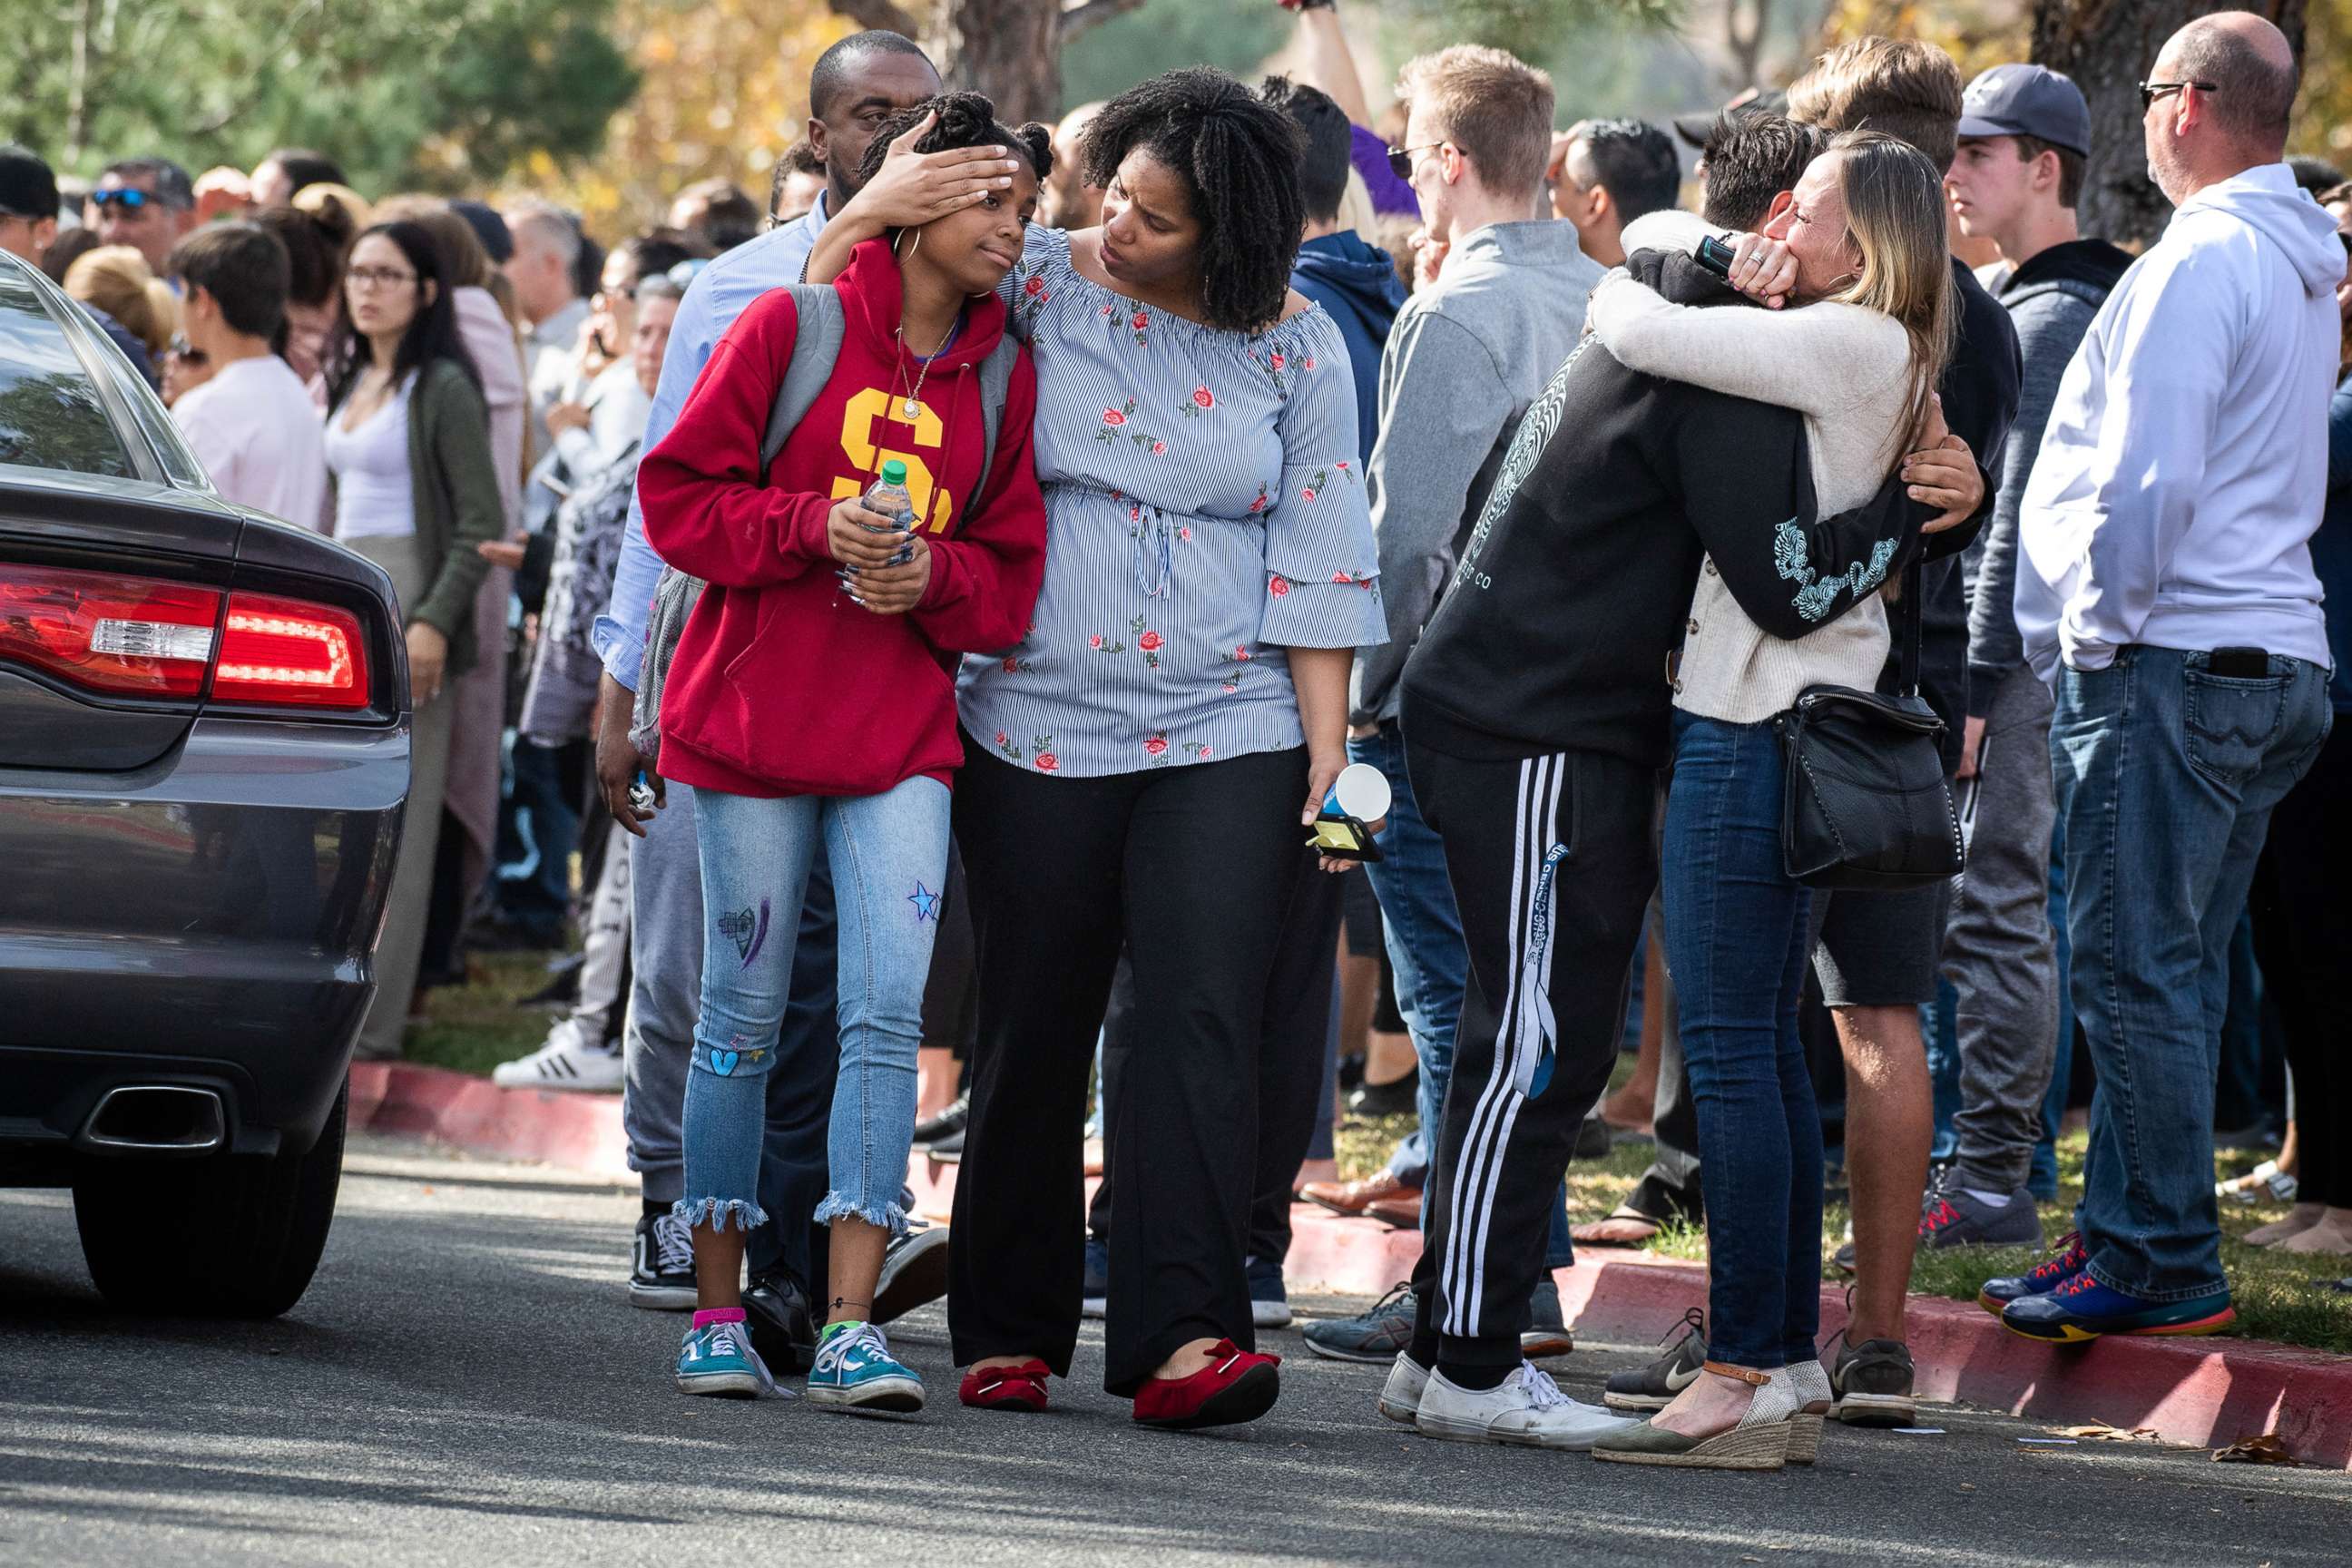 PHOTO: Saugus High School students reunite with their families after a mass shooting at their Santa Clarita High School that left two dead, Nov. 14, 2019.